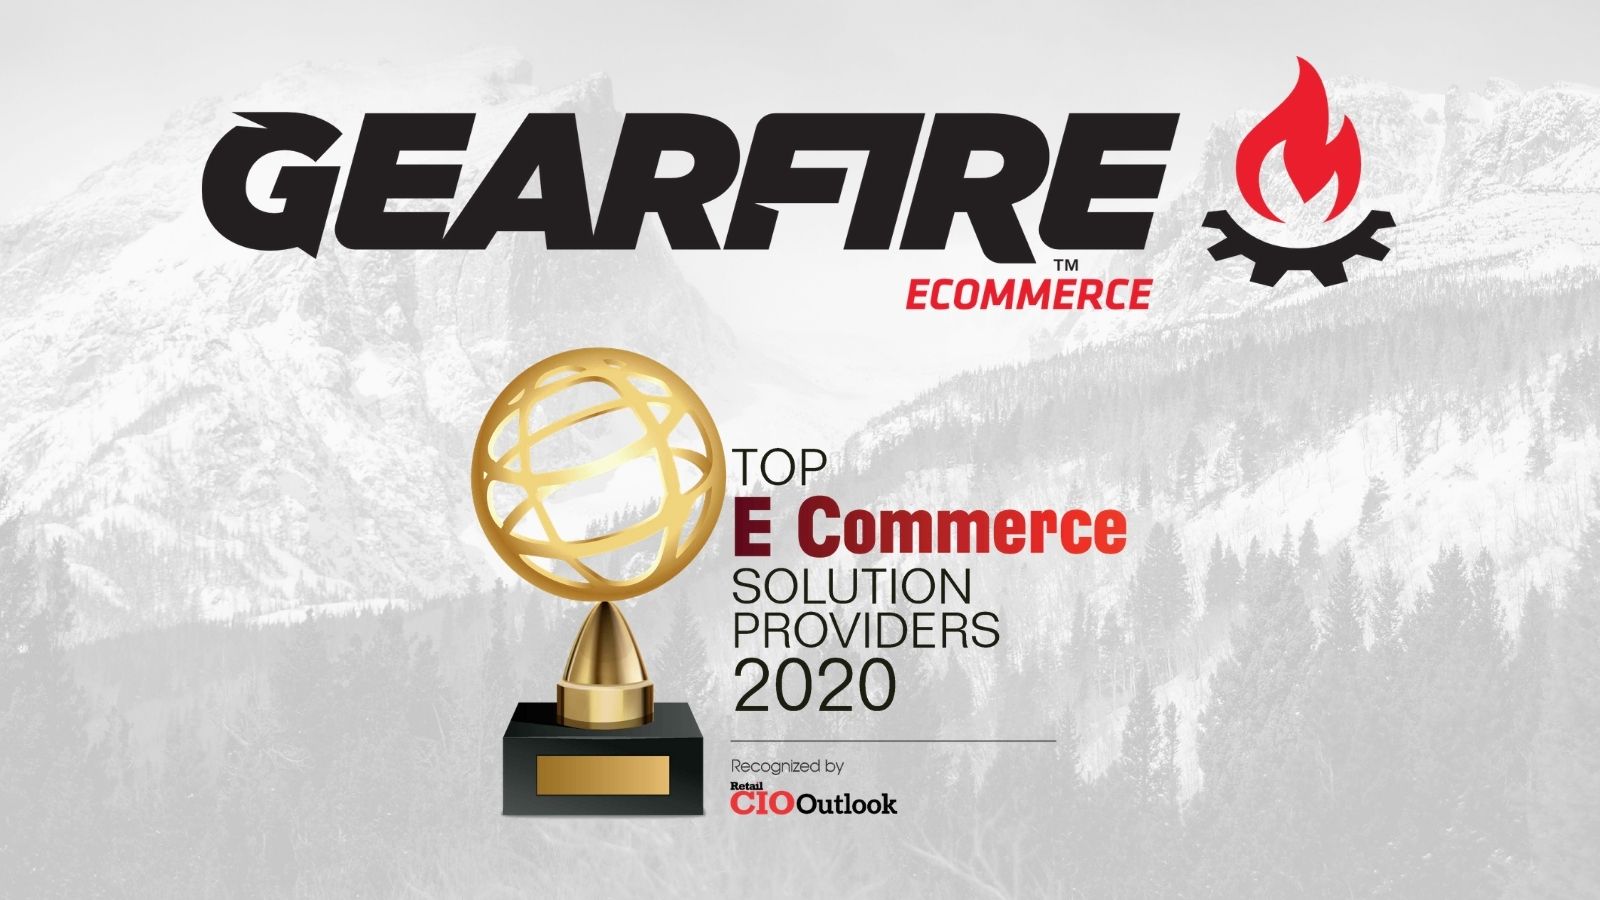 Retail CIO Outlook Names Gearfire Among Top eCommerce Solution Providers featured img